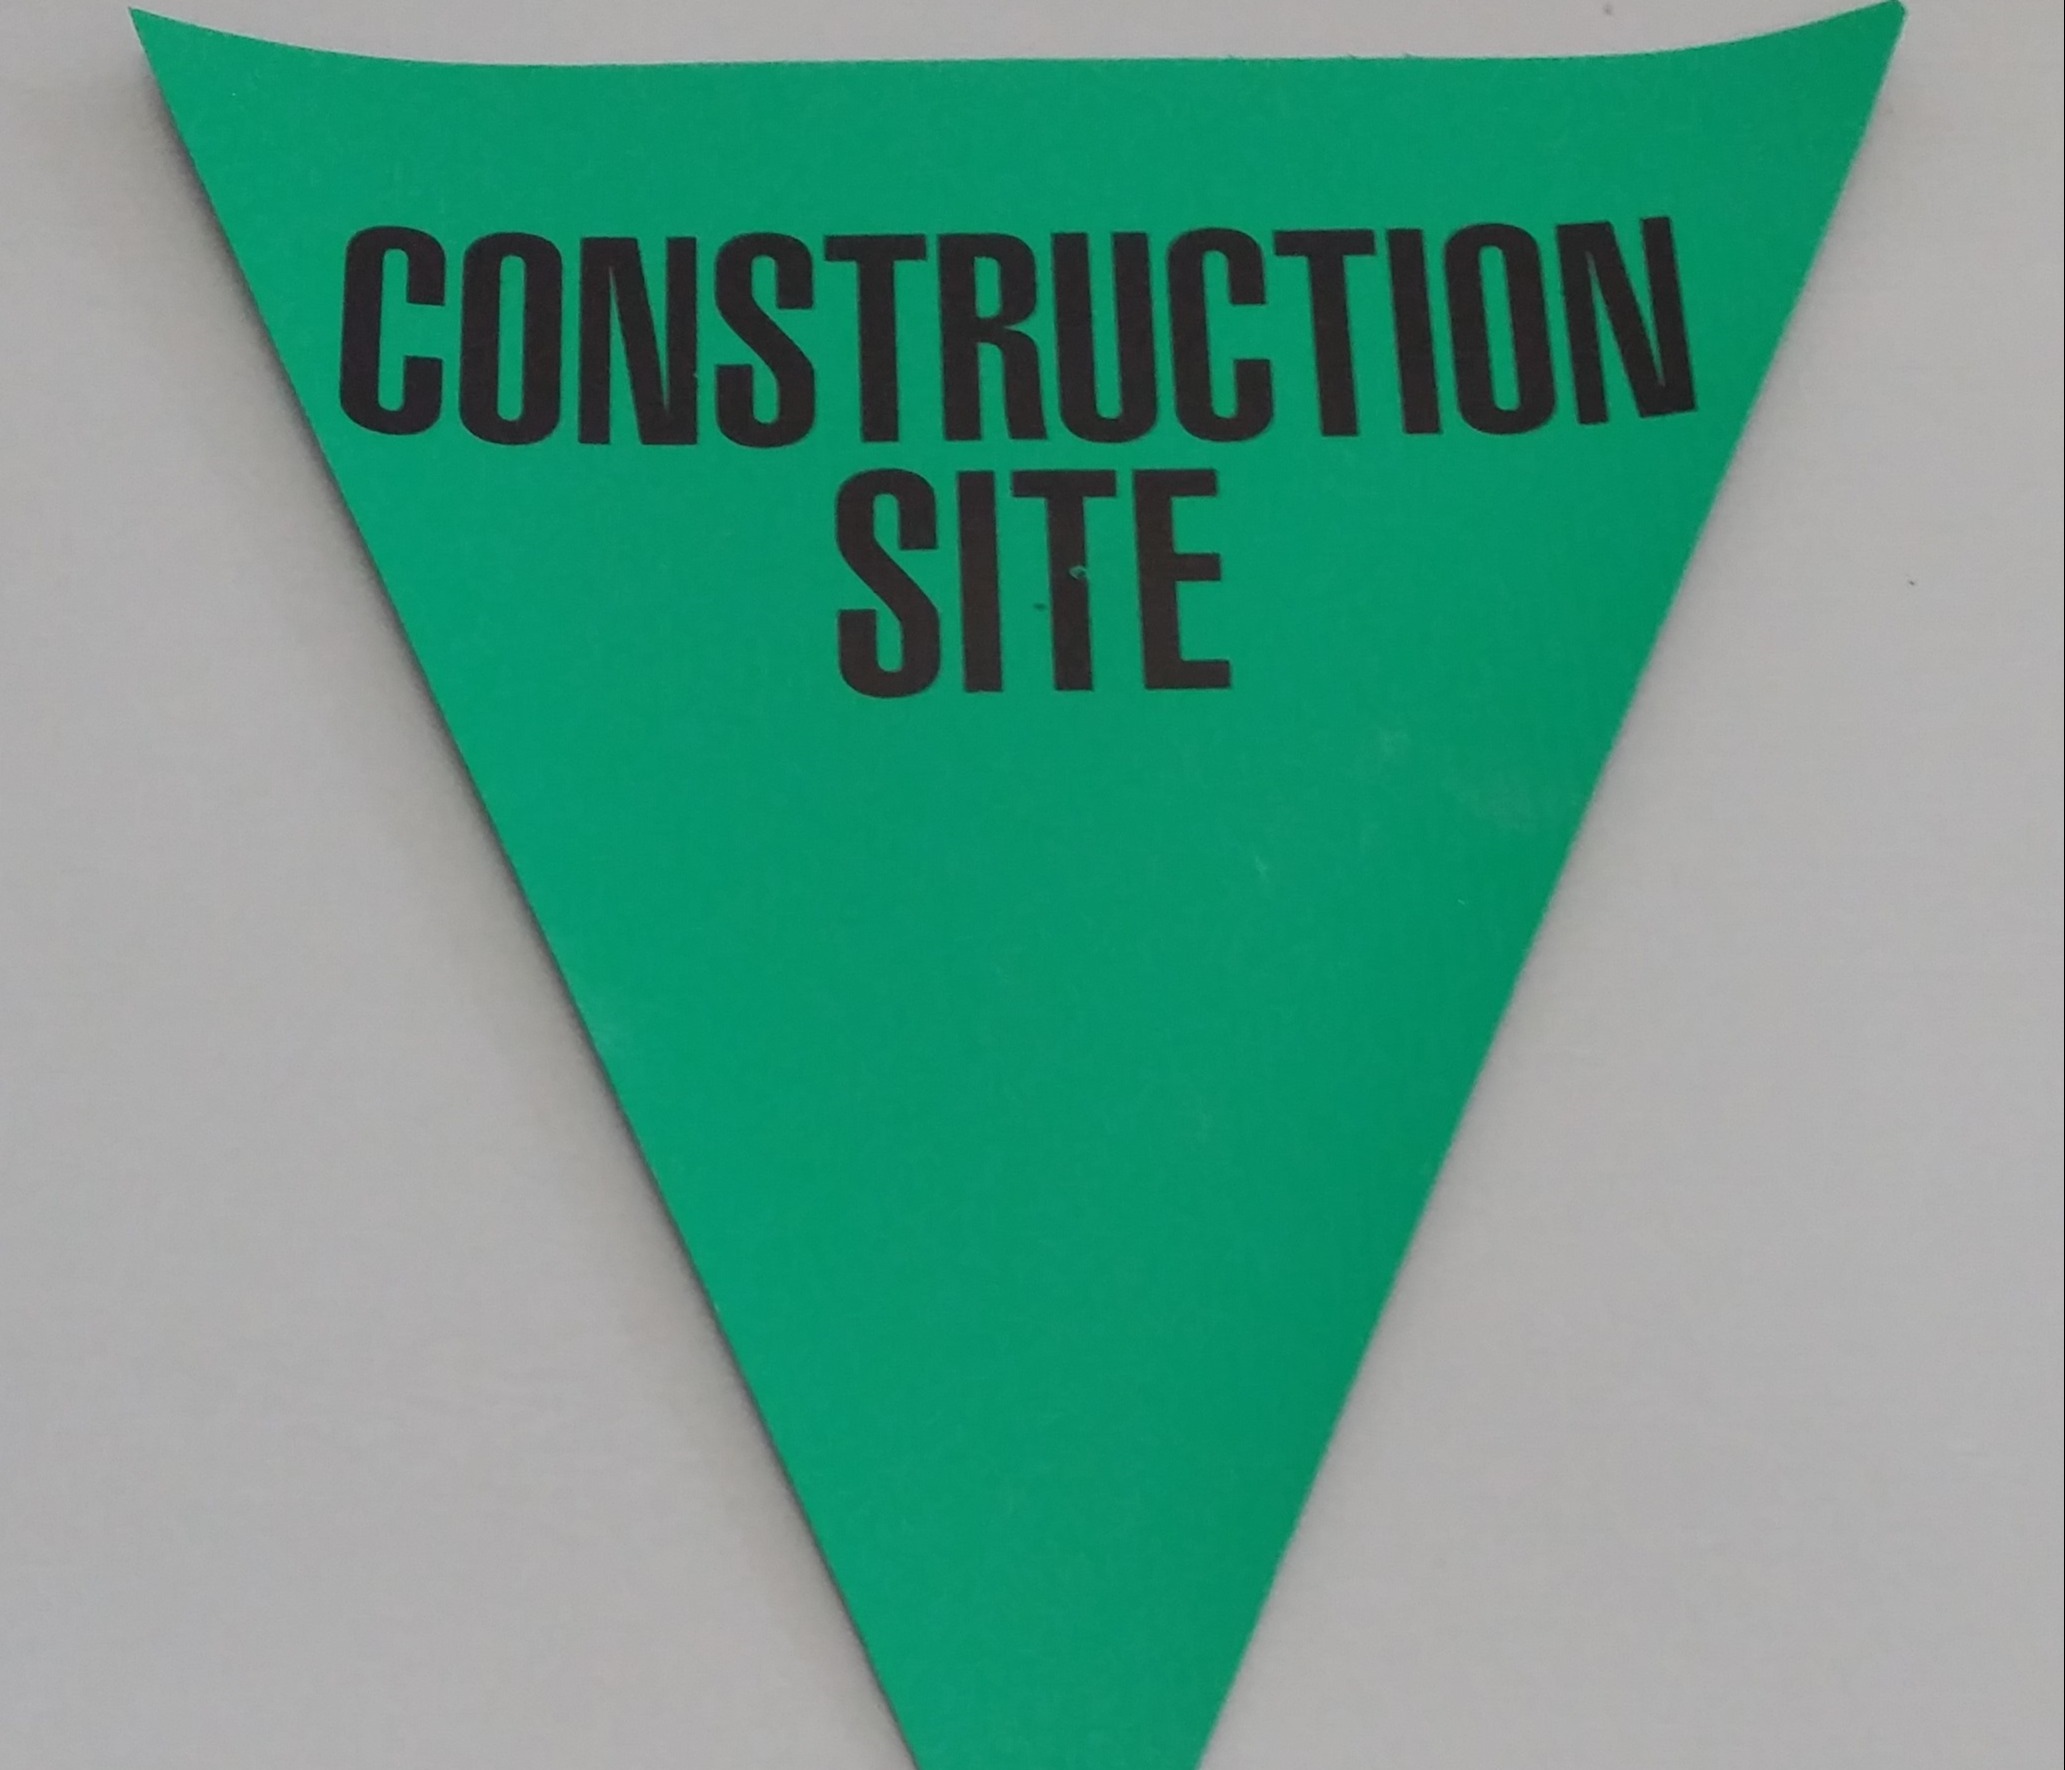 Construction Site (green)